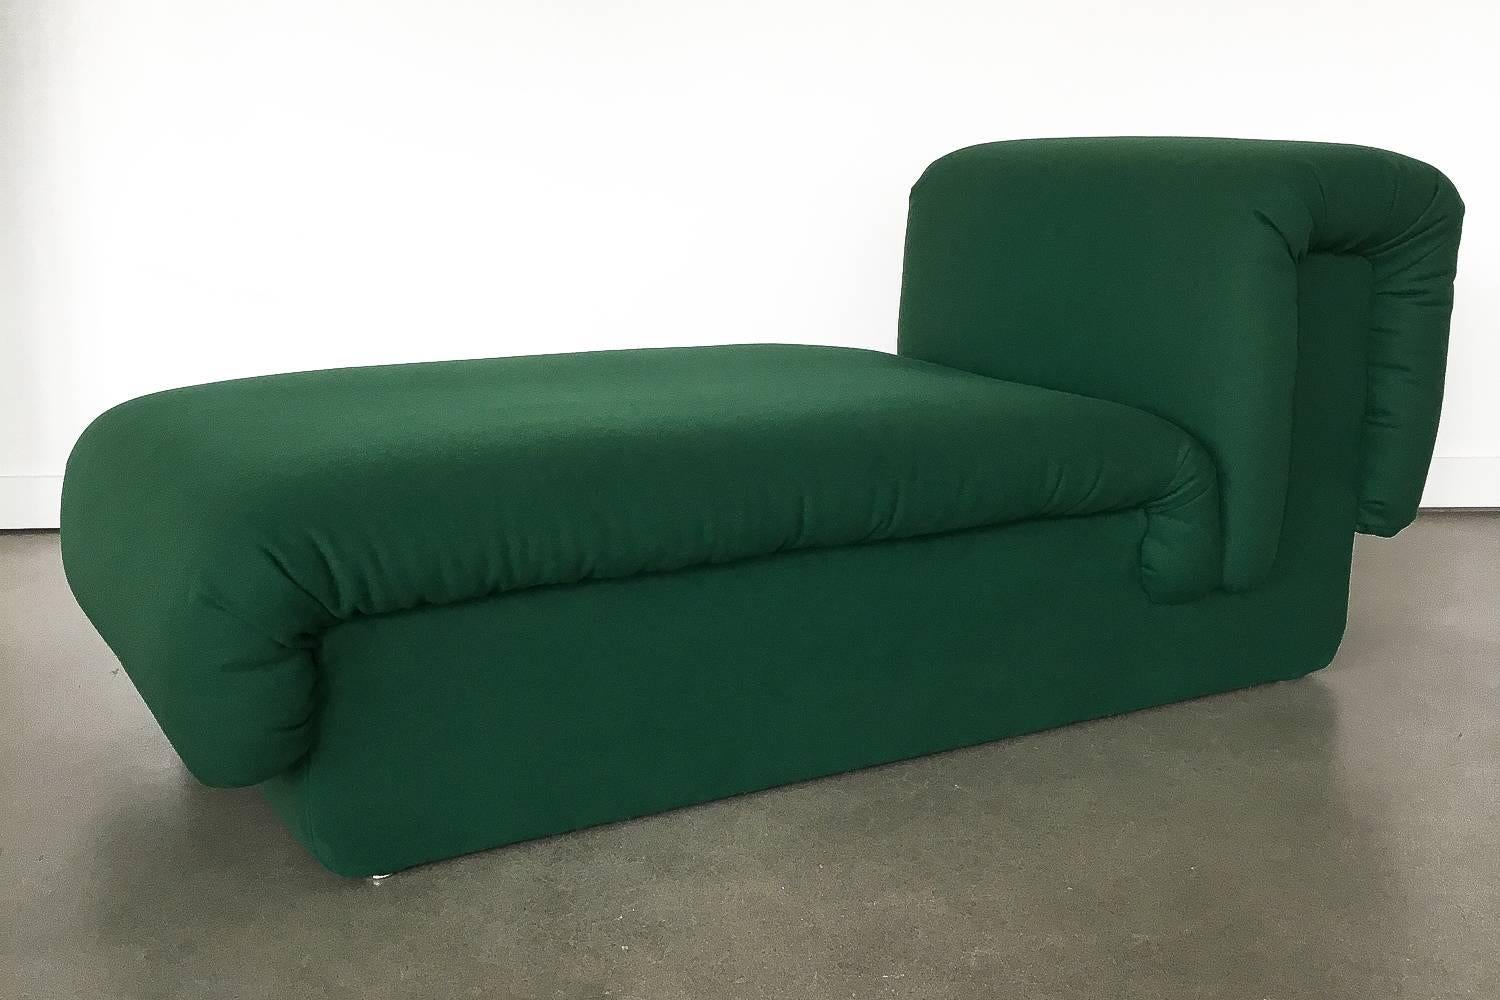 Late 20th Century Pair of Italian Fully Upholstered Modernist Chaise Longues